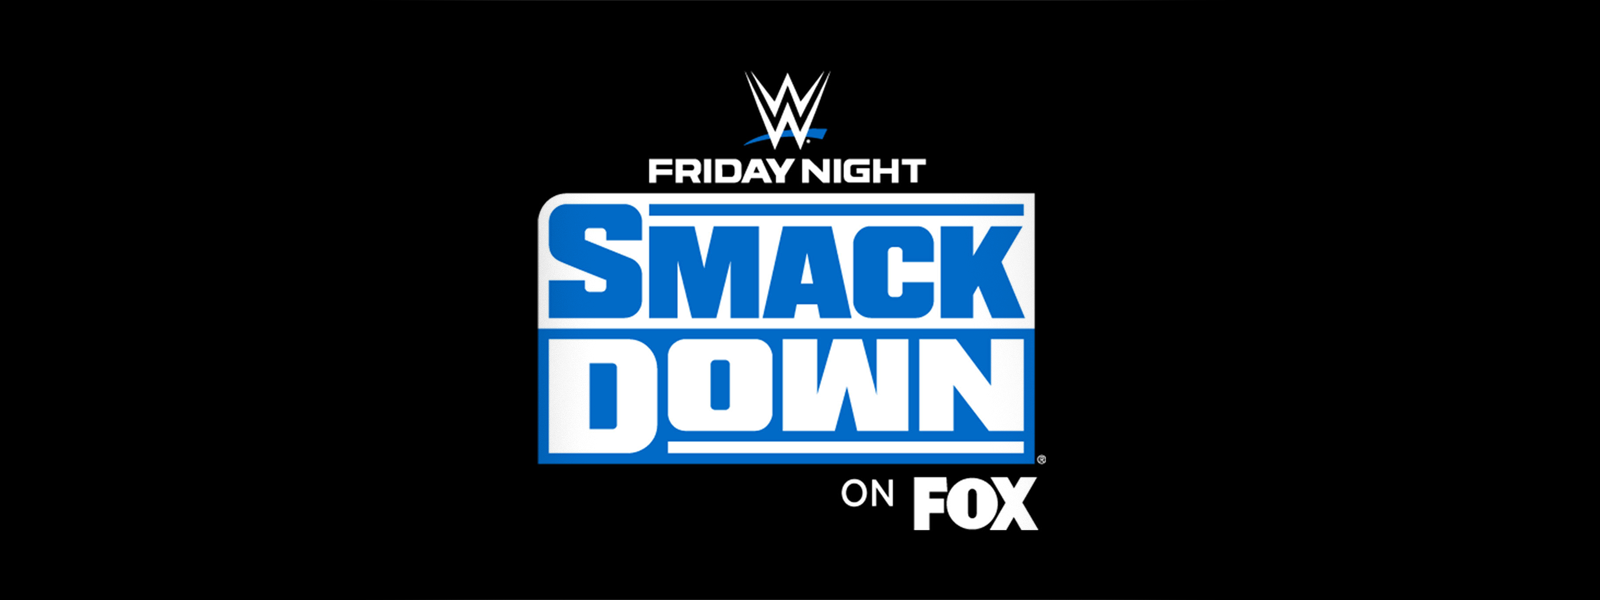 Wwe Smackdown Returns To Rocket Mortgage Fieldhouse On Friday April 17th At 7 15 P M Rocket Mortgage Fieldhouse